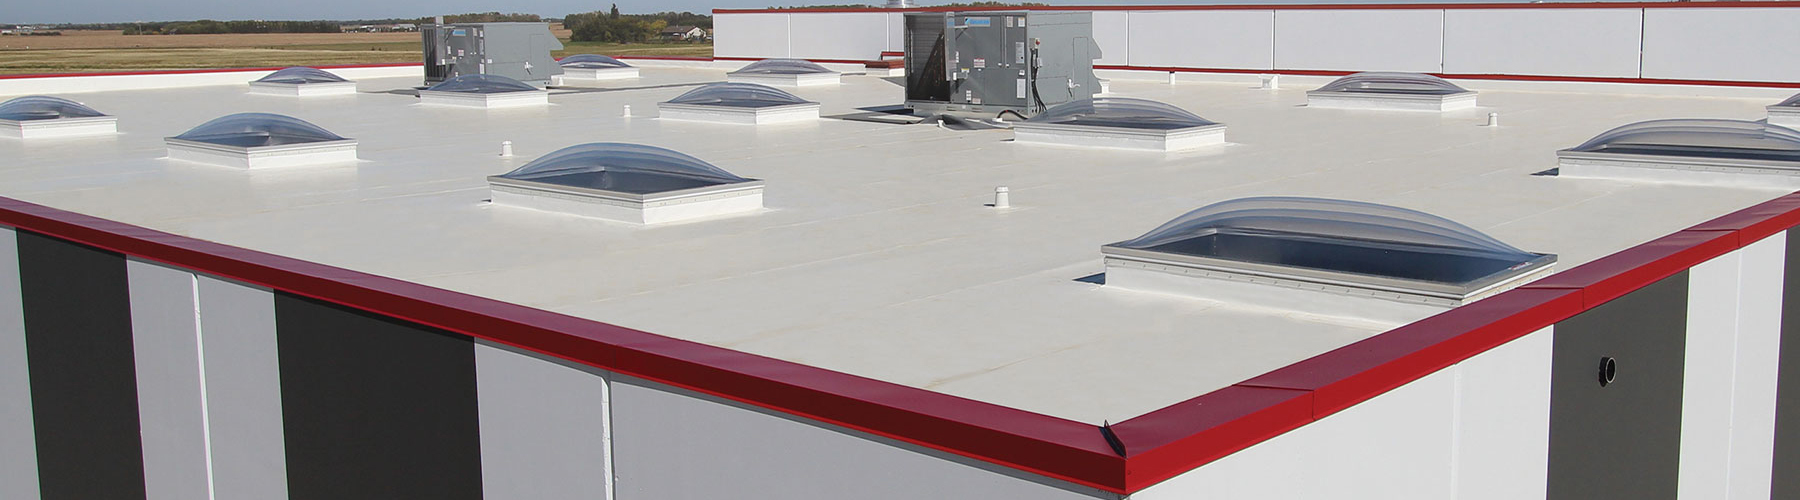 Contact Duro-Last® Roofing Quality Assurance Team